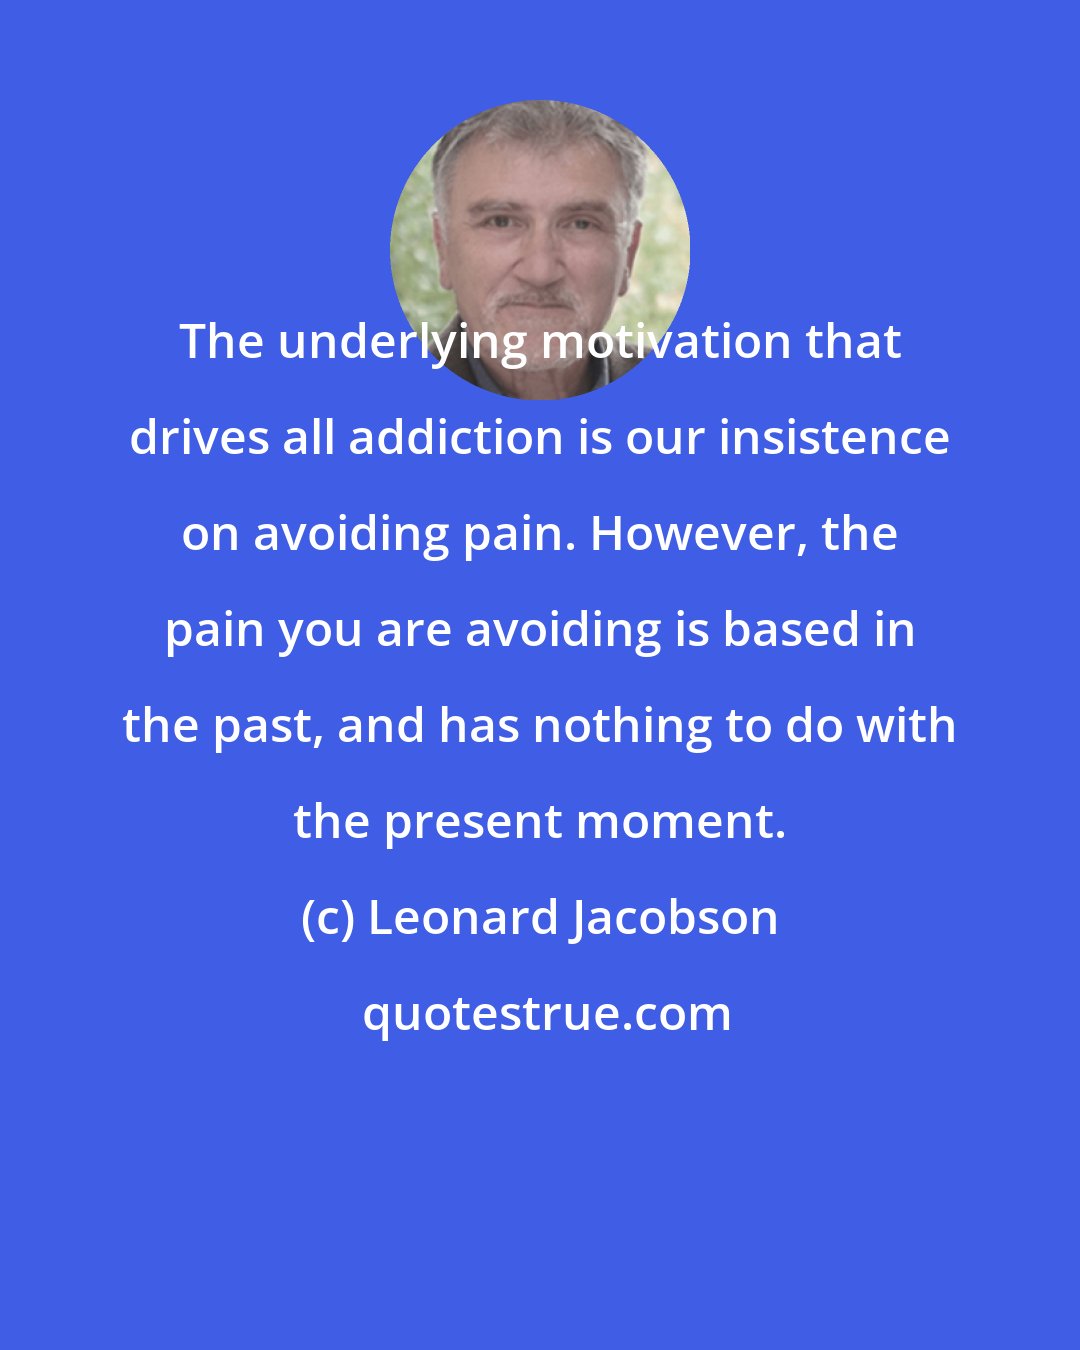 Leonard Jacobson: The underlying motivation that drives all addiction is our insistence on avoiding pain. However, the pain you are avoiding is based in the past, and has nothing to do with the present moment.